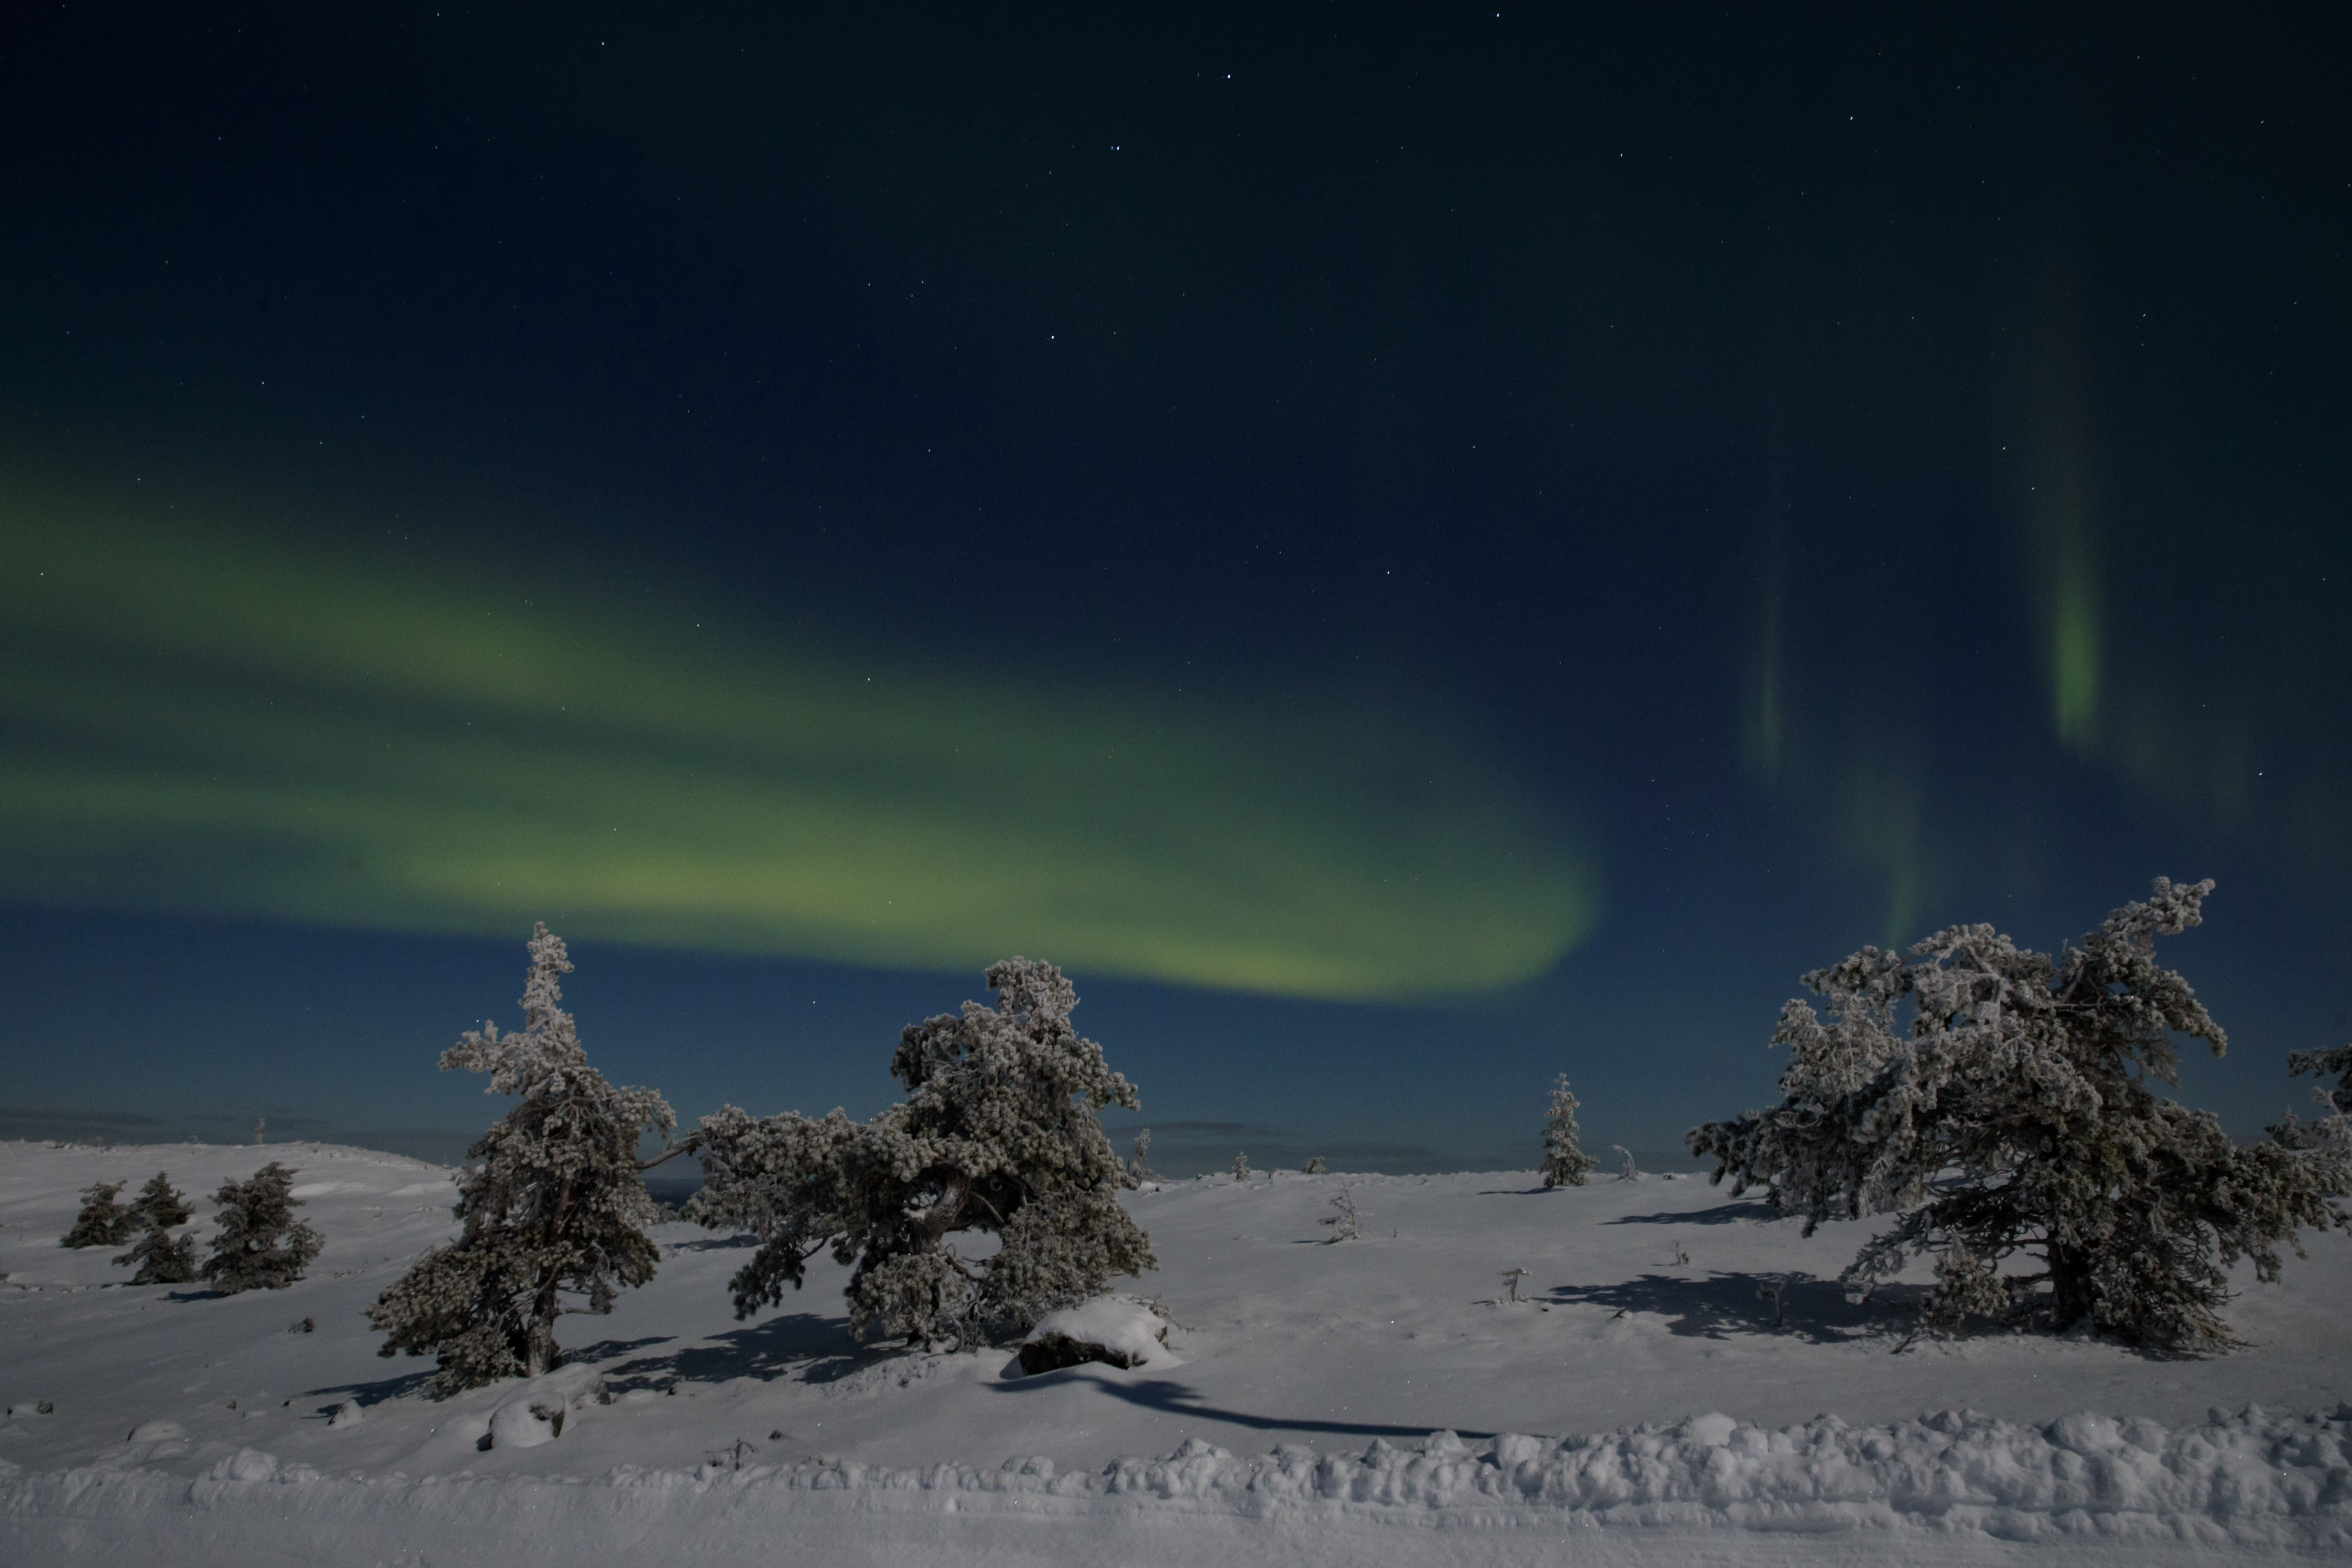 Southern and central Finland is set to be shown in the northern lights